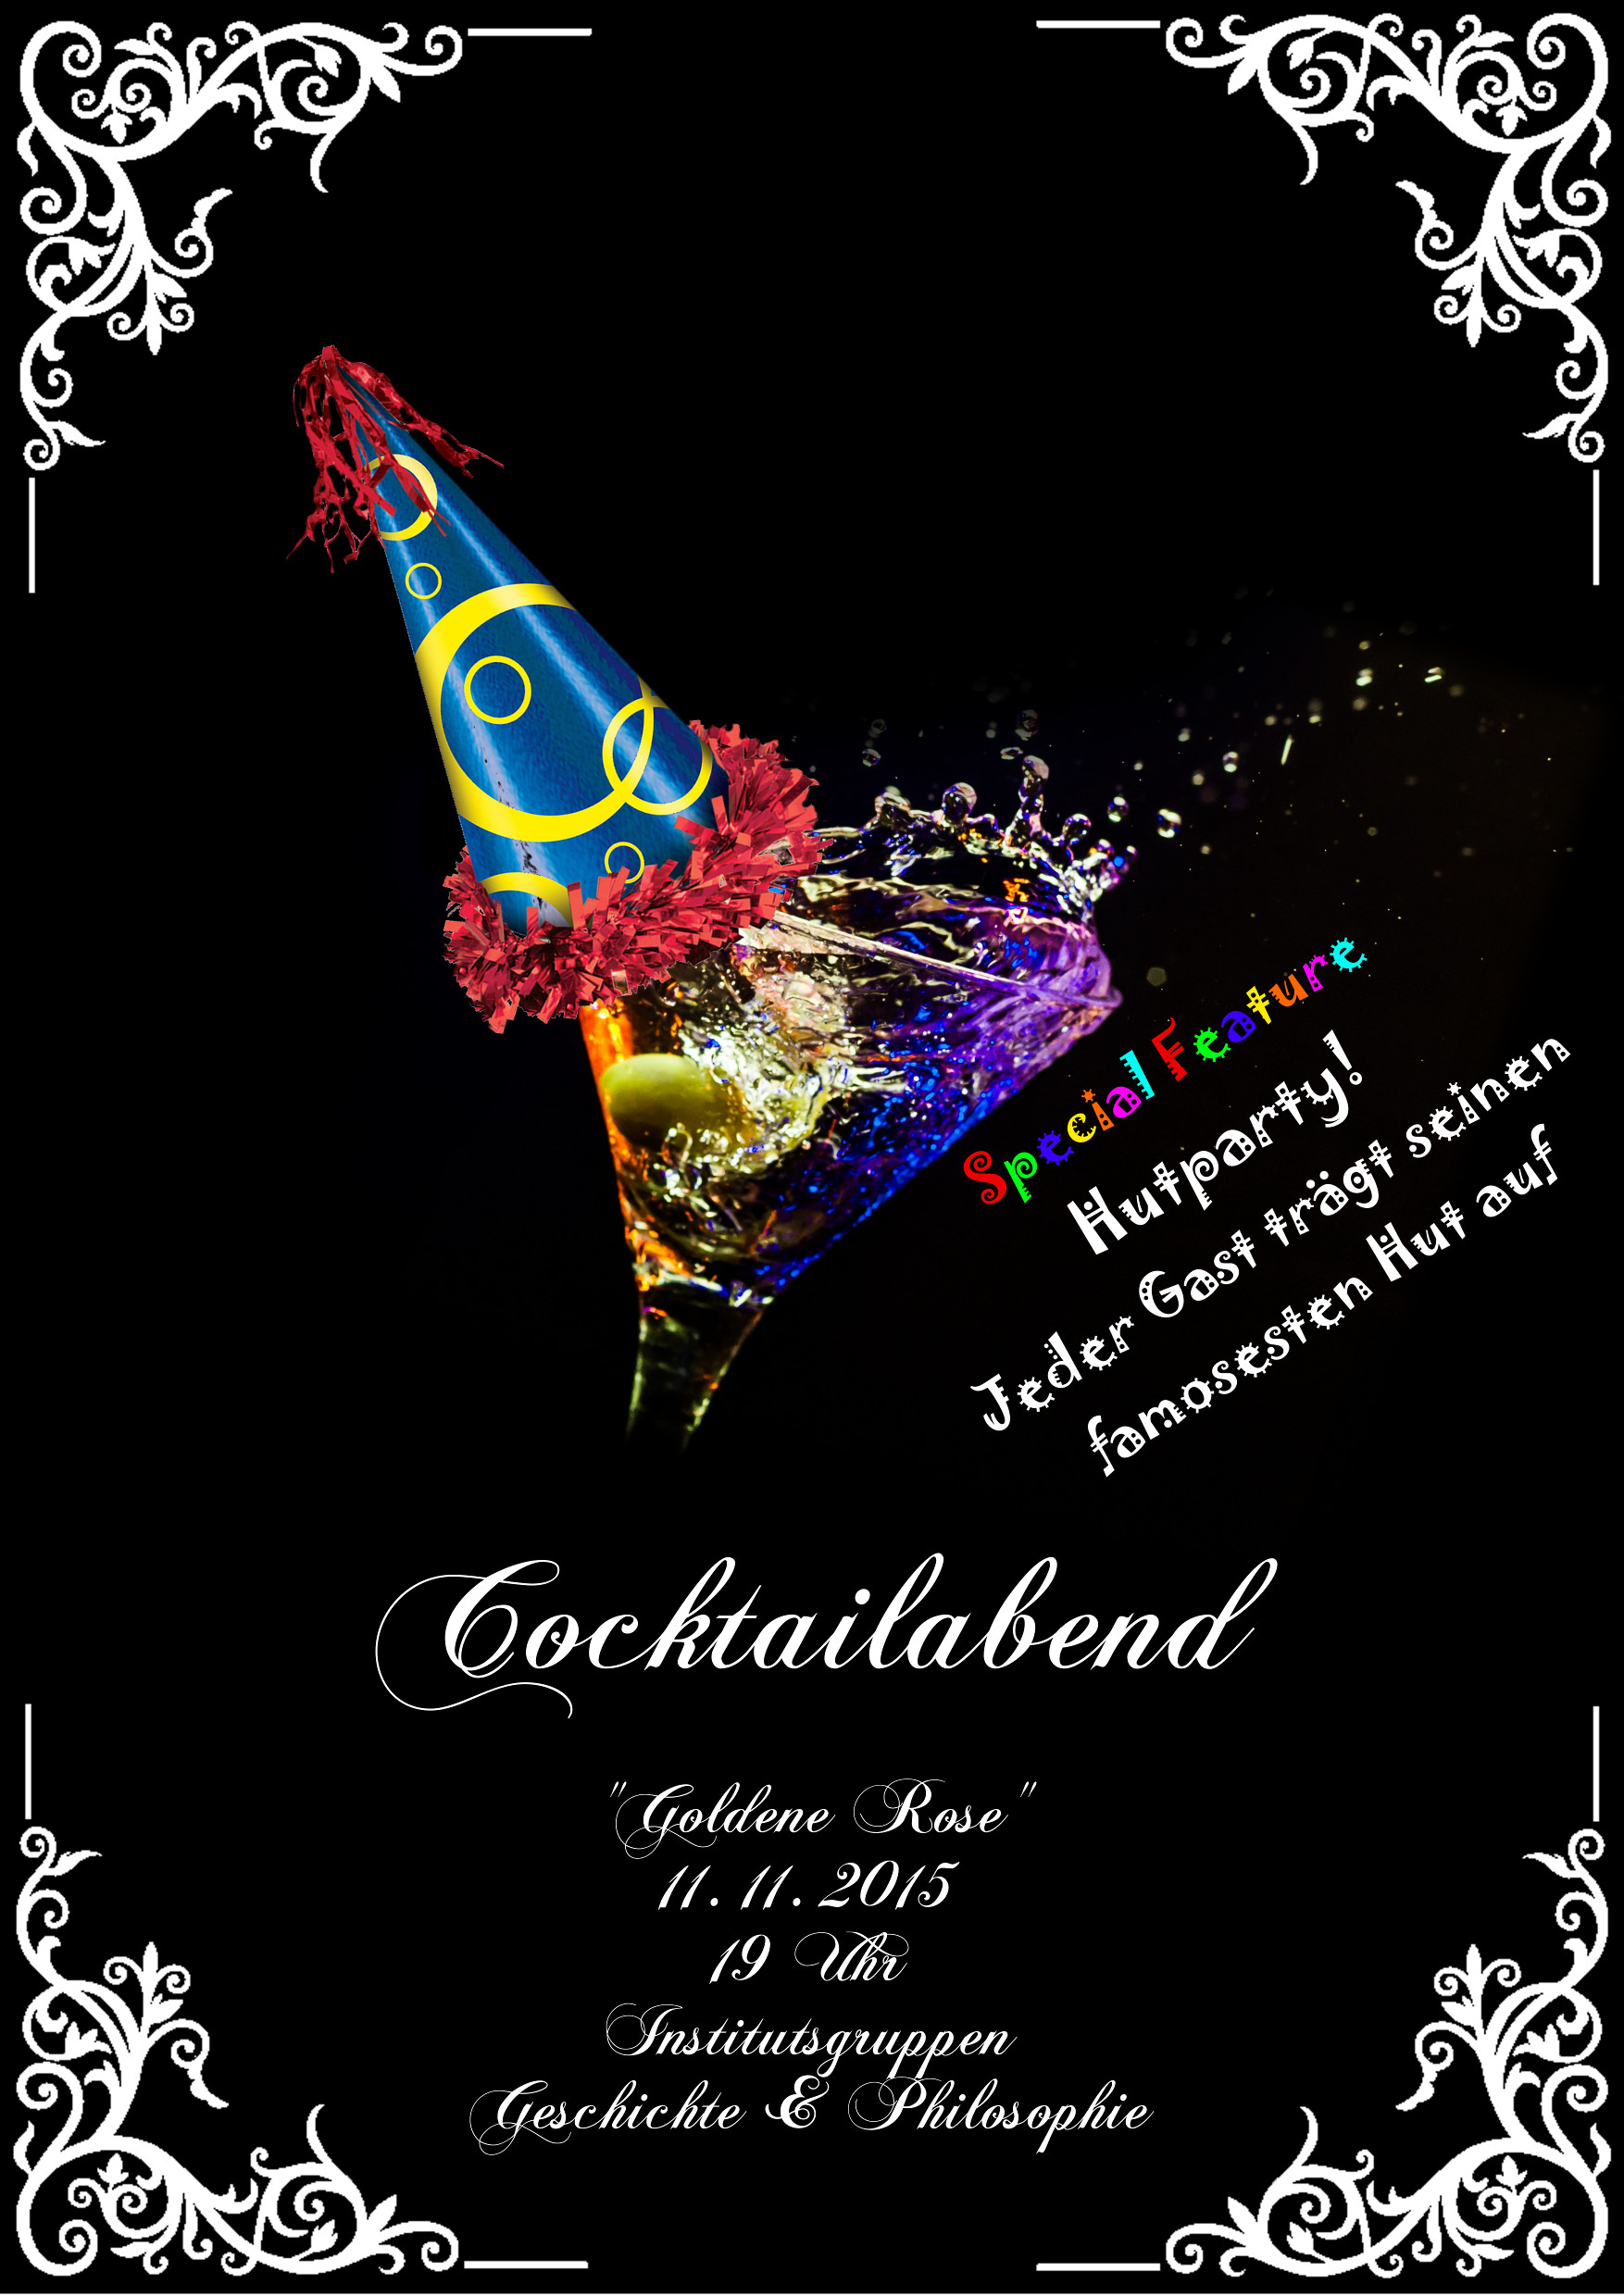 Cocktailabend_11_11